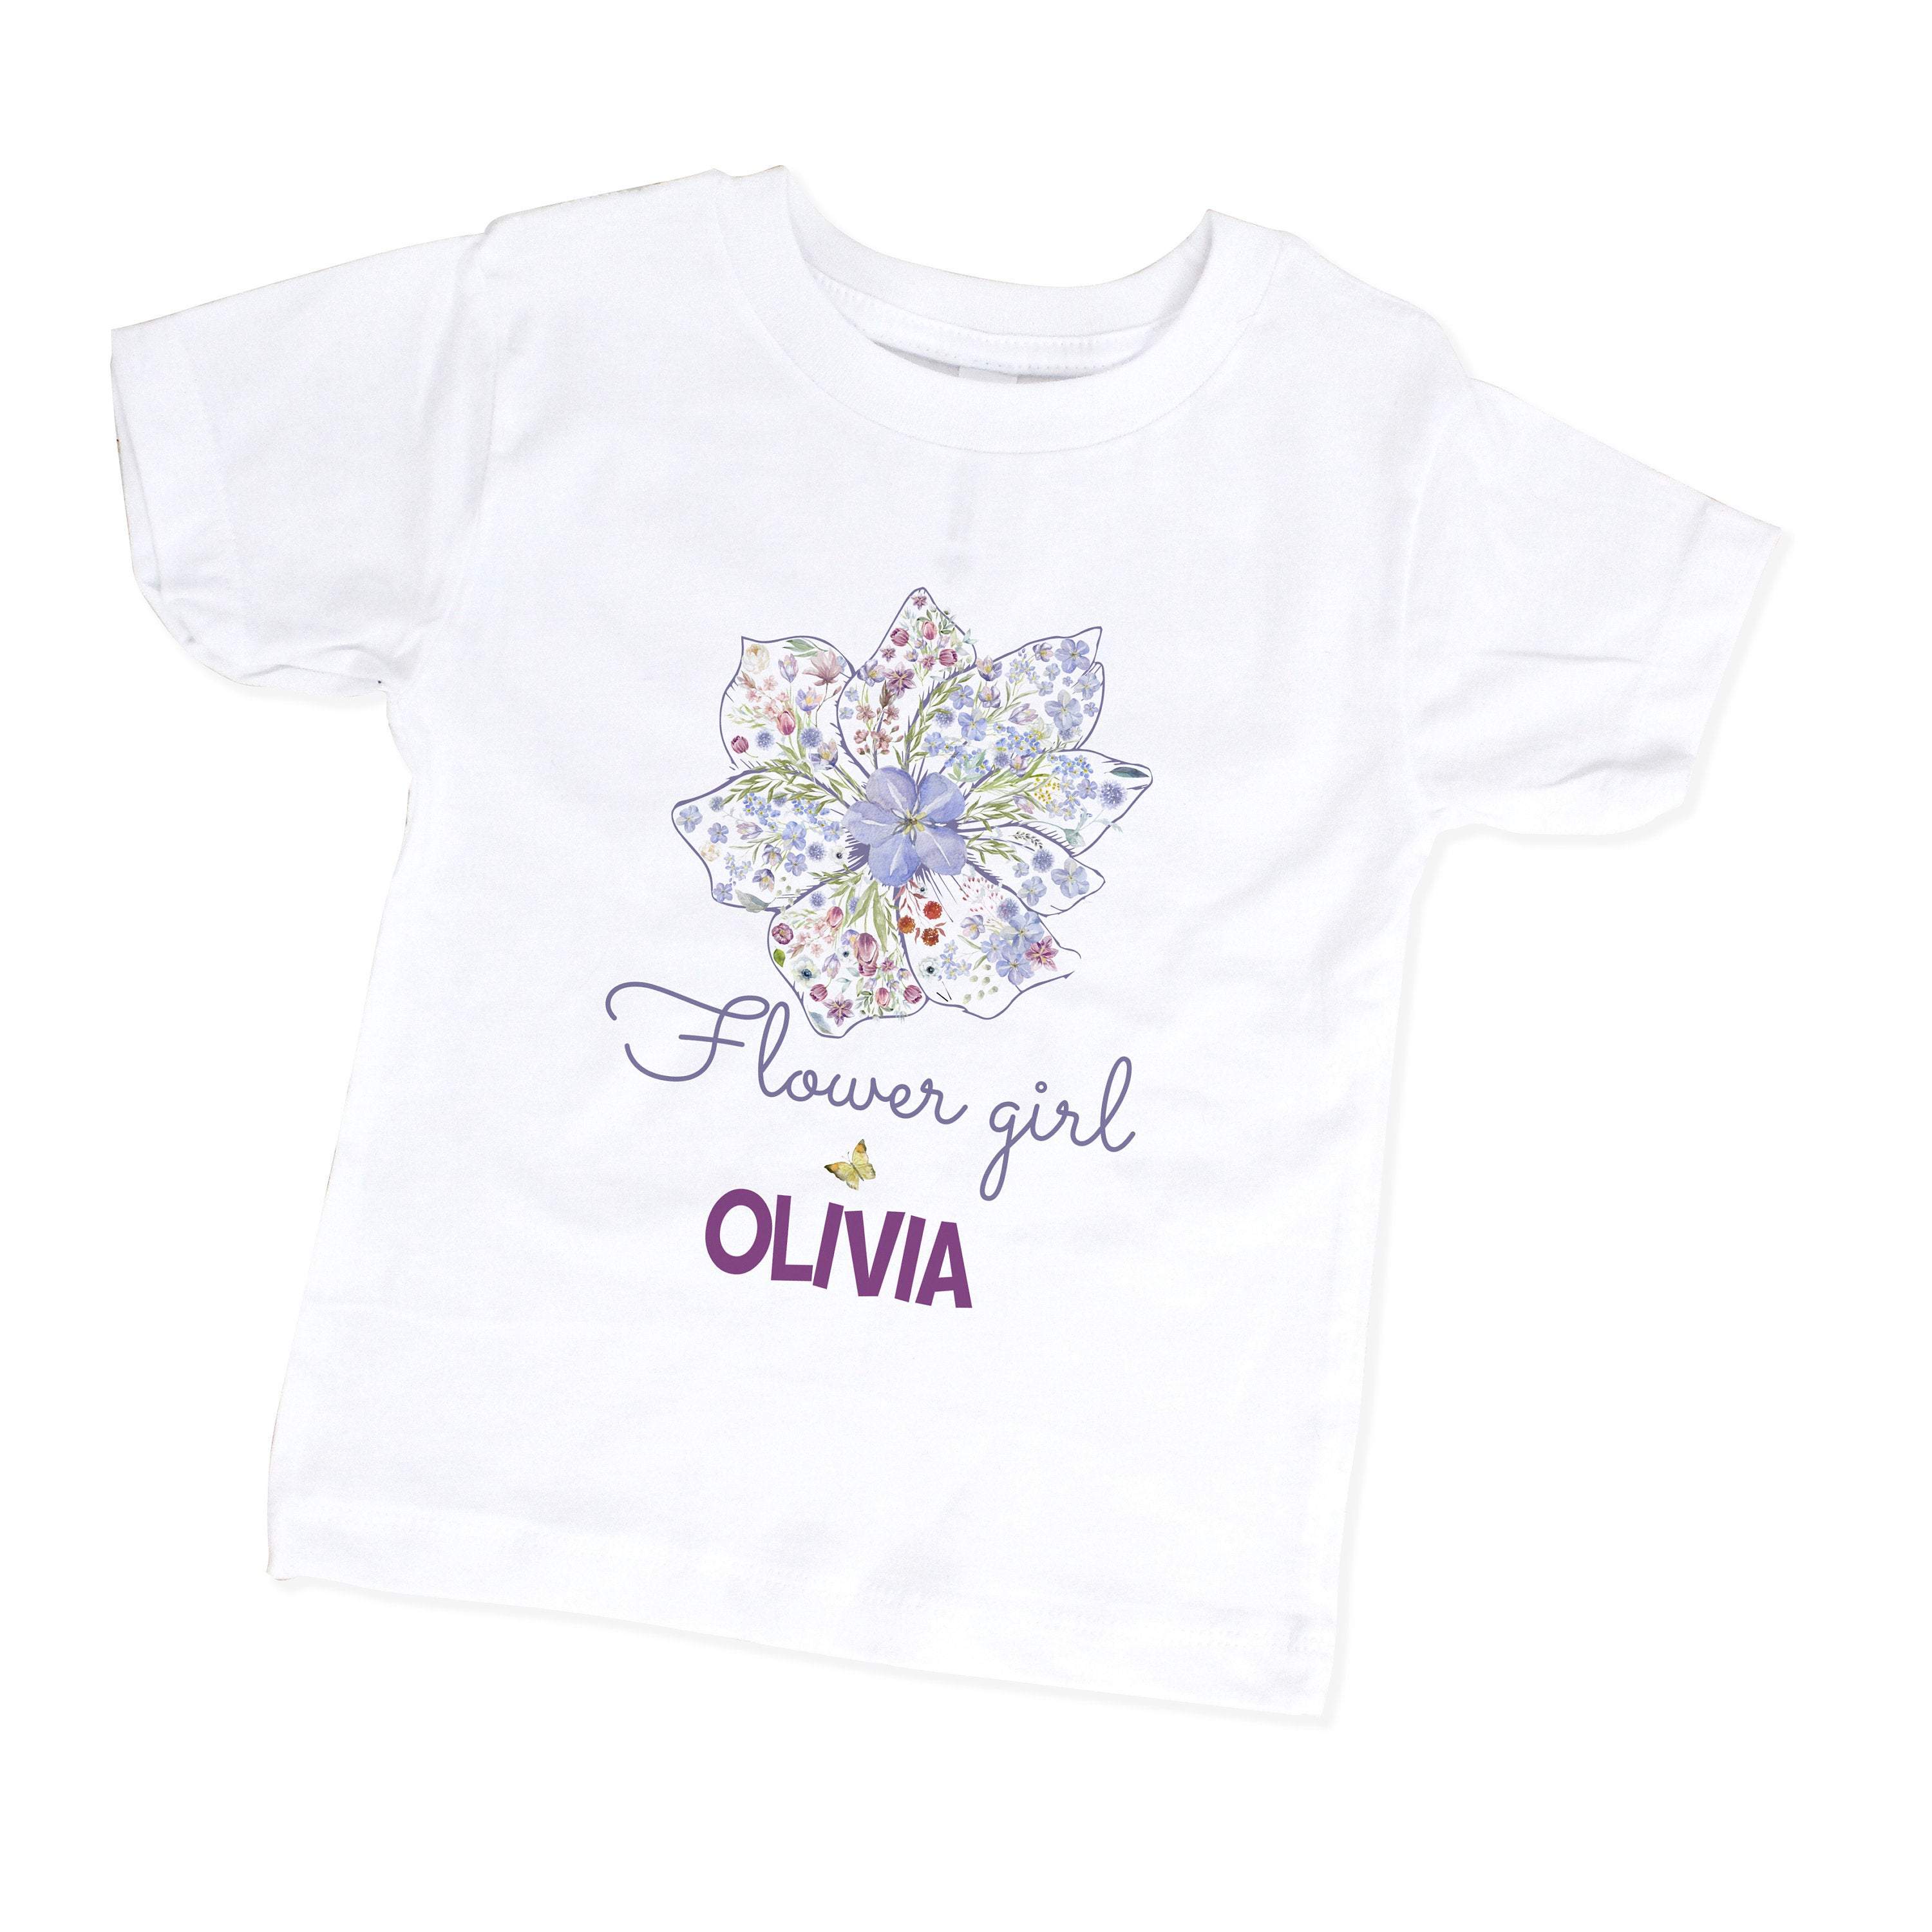 Personalised flower girl t-shirt, Flower girl outfit, Floral Wreath Tee, Wedding gift for kids